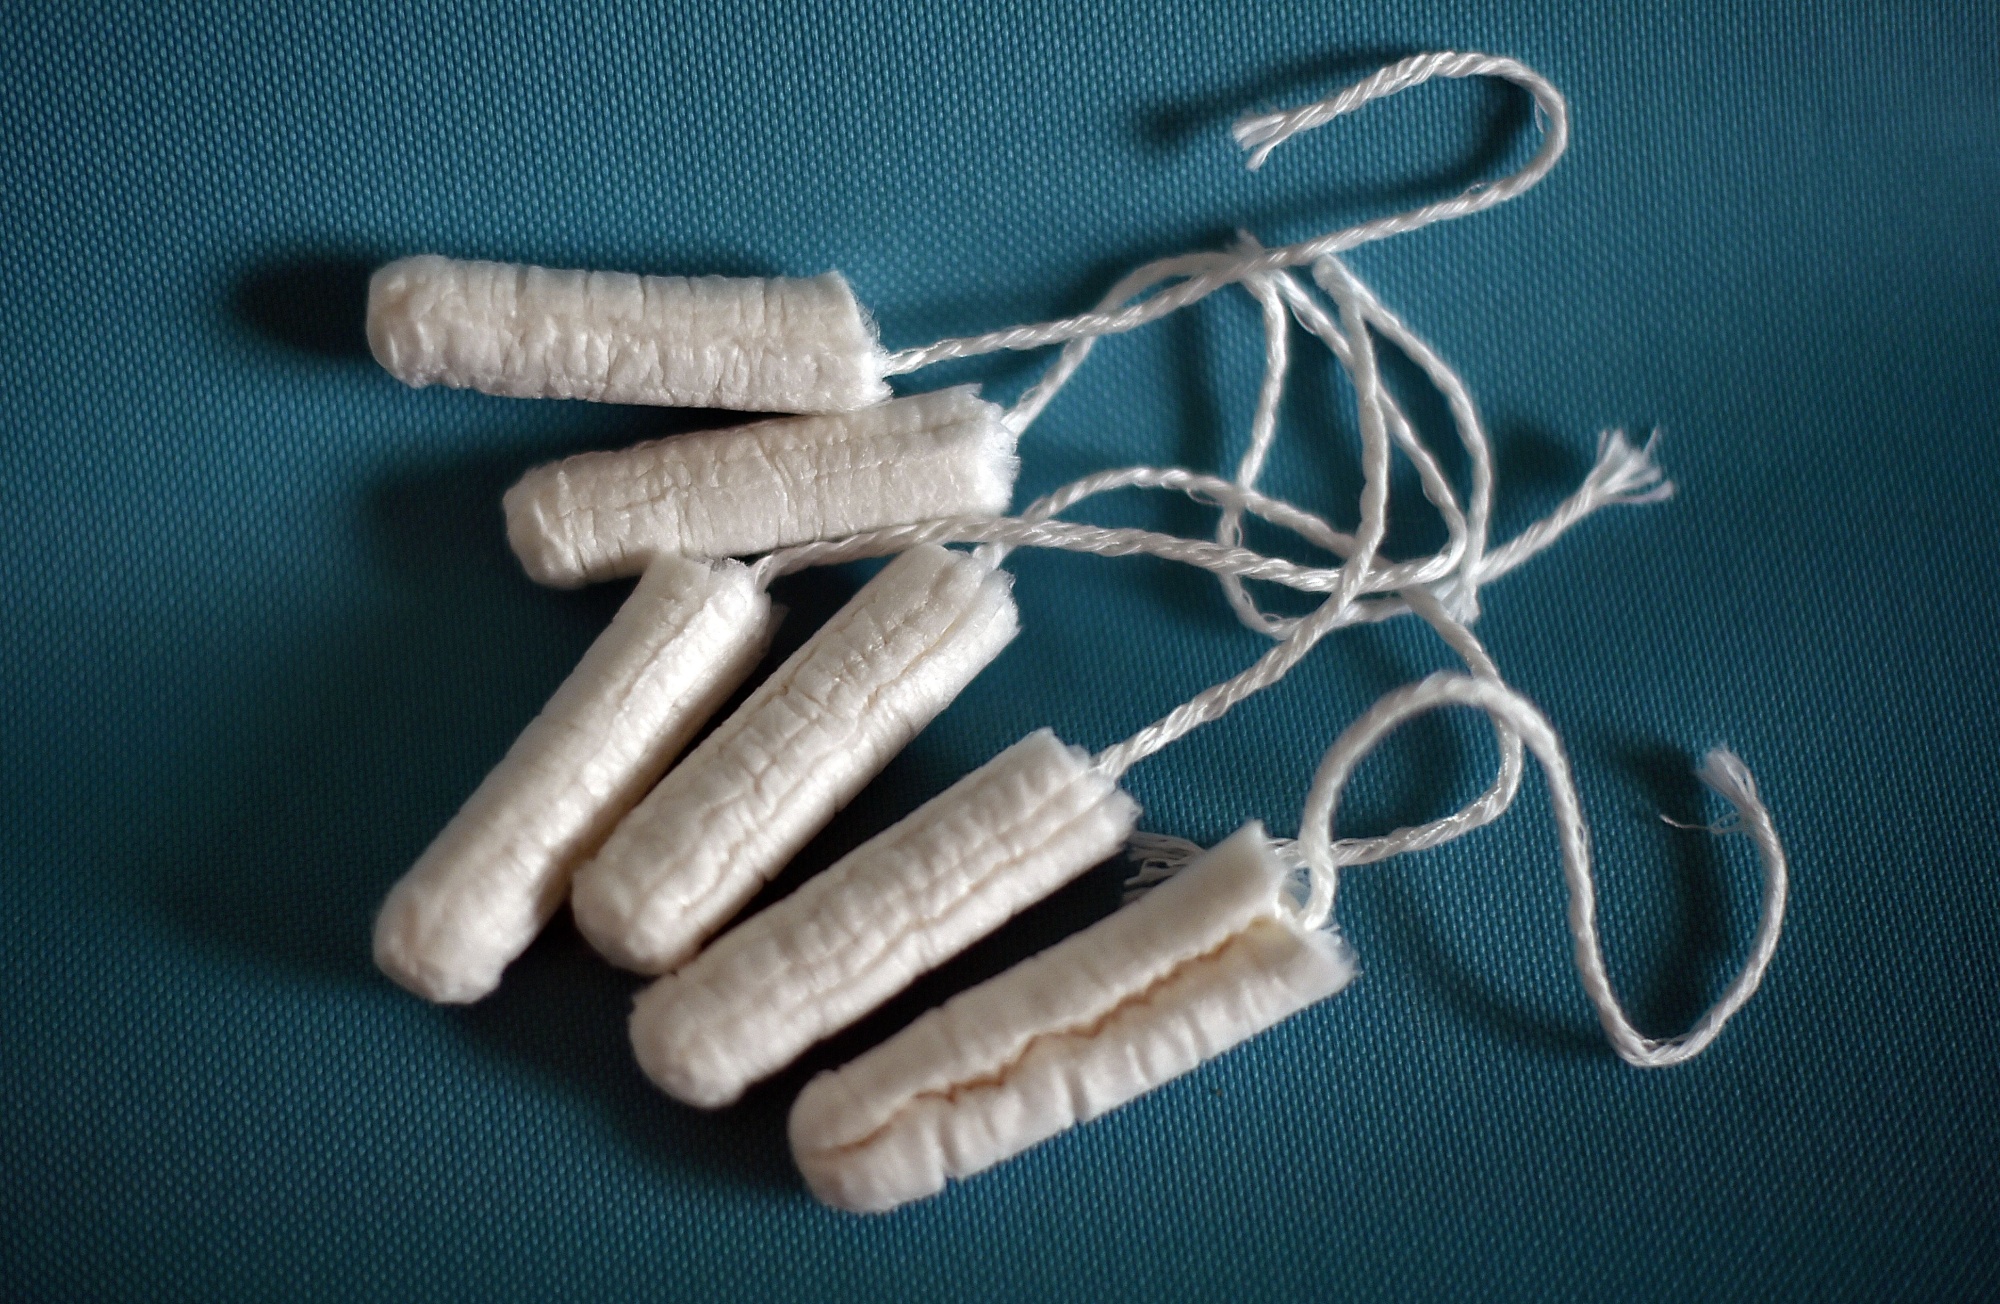 4 products we've tried to help during the tampon shortage: Period